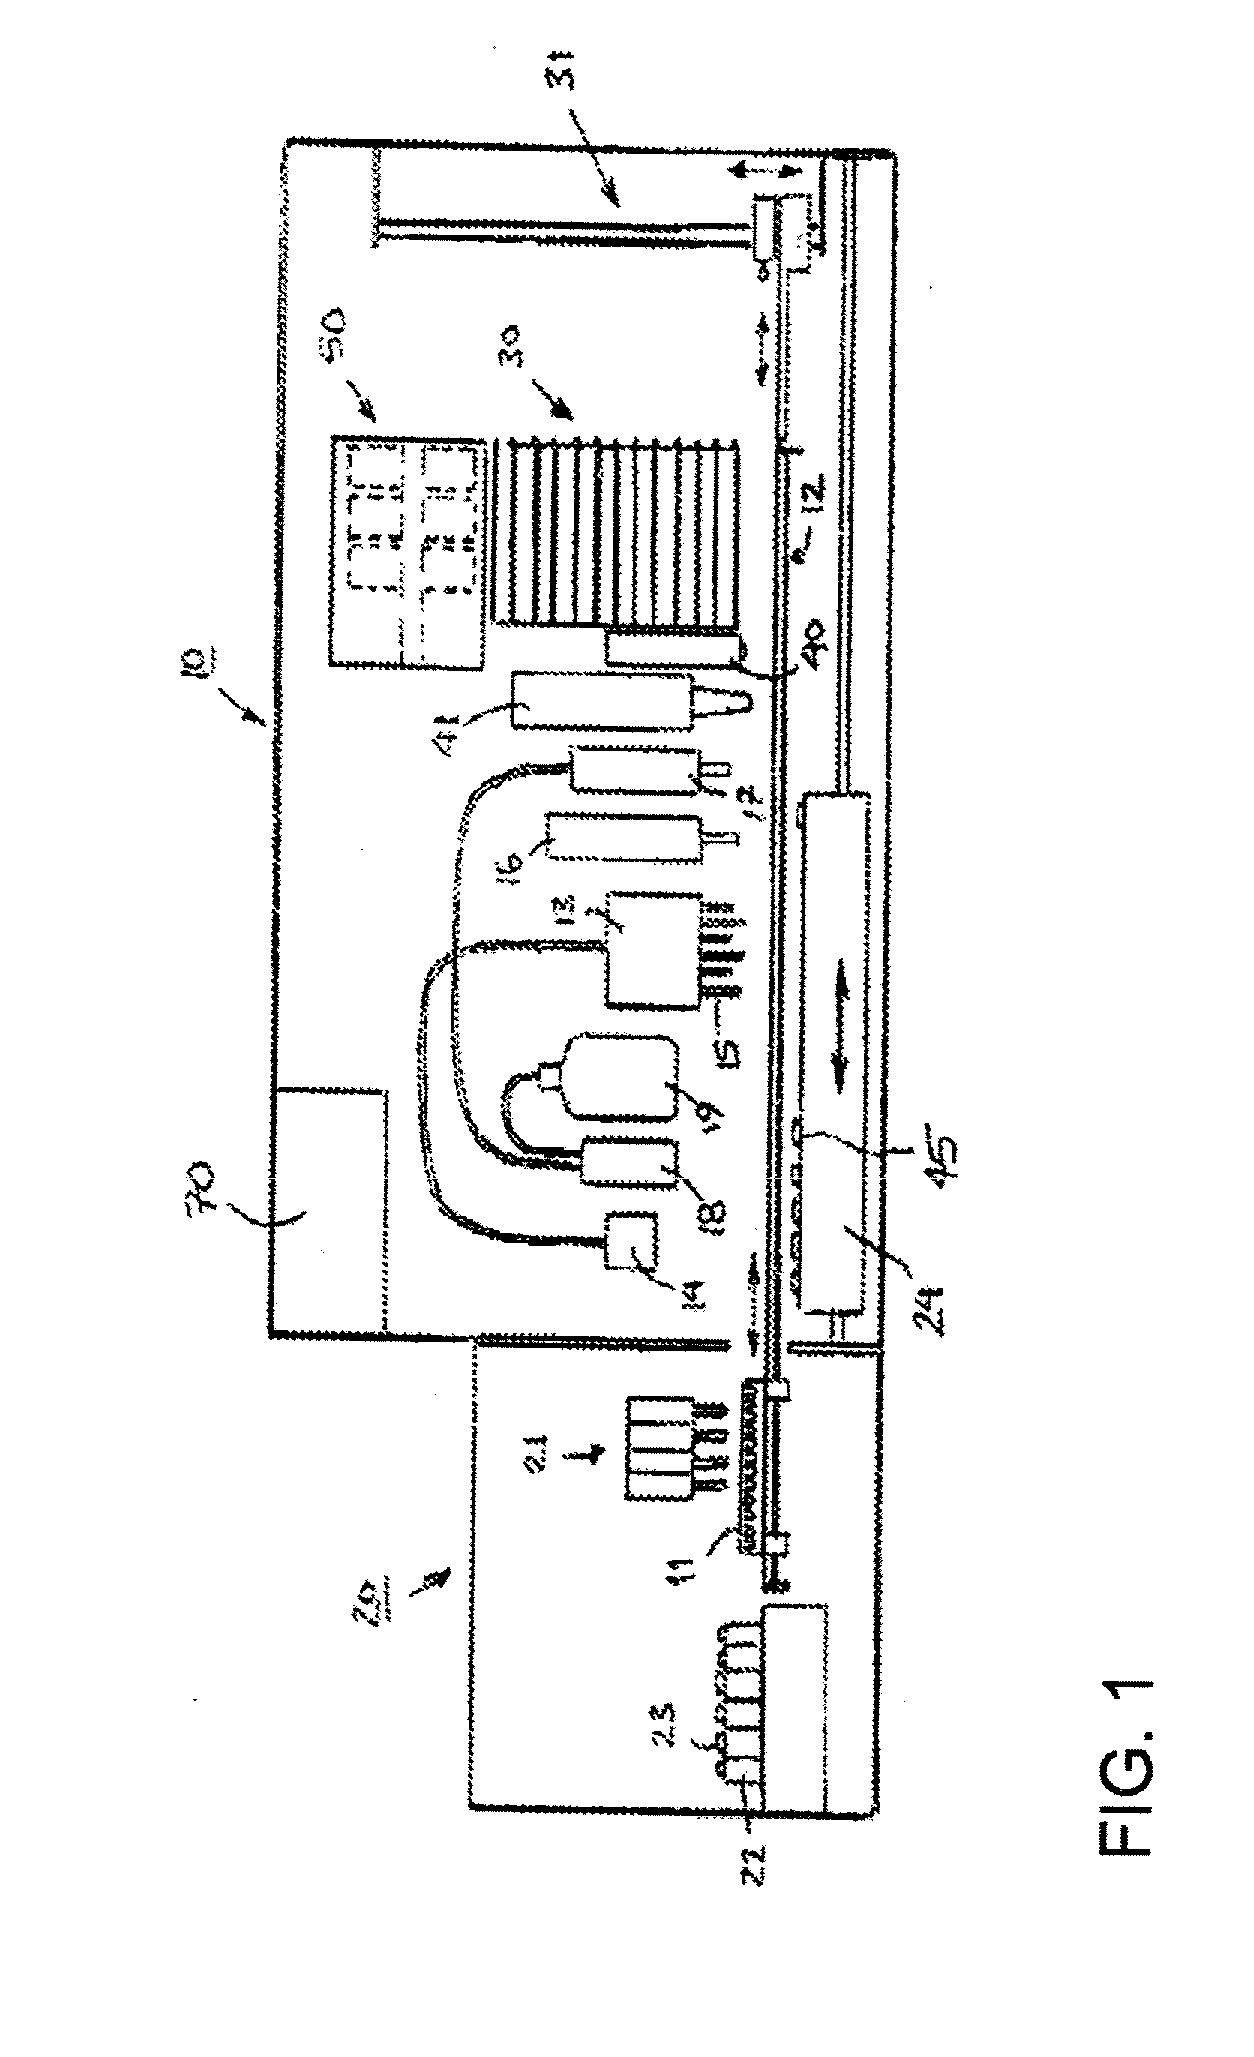 Automated instrumentation and method for measurements of samples